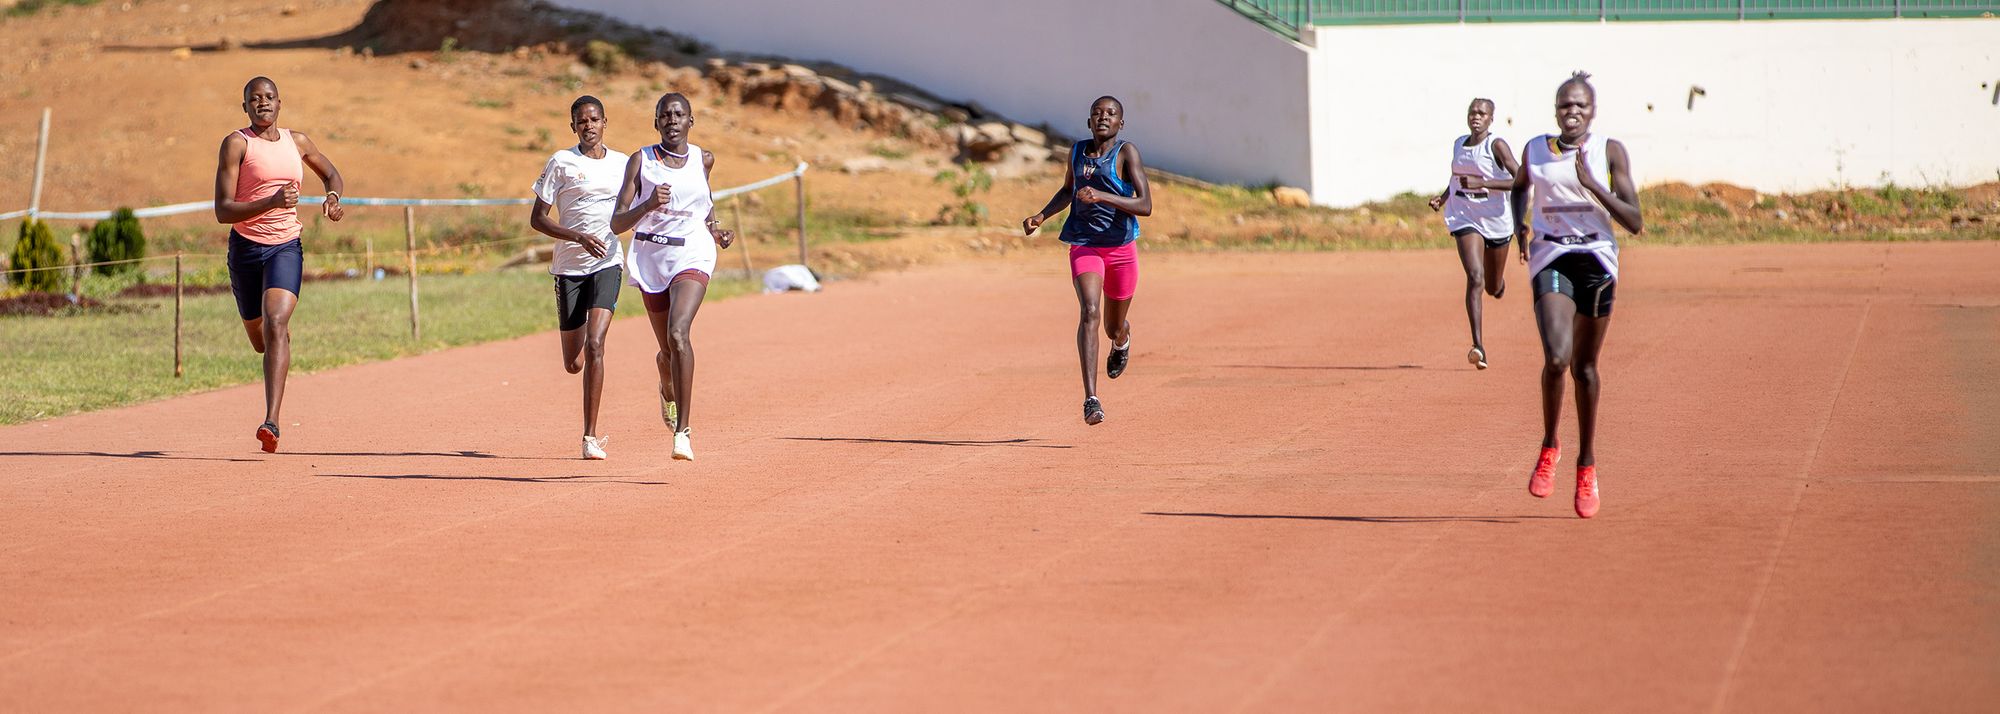 A three-year journey to the World Athletics U20 Championships Lima 24 is entering its final stretch for athletes on the U20 World Athletics Athlete Refugee Team